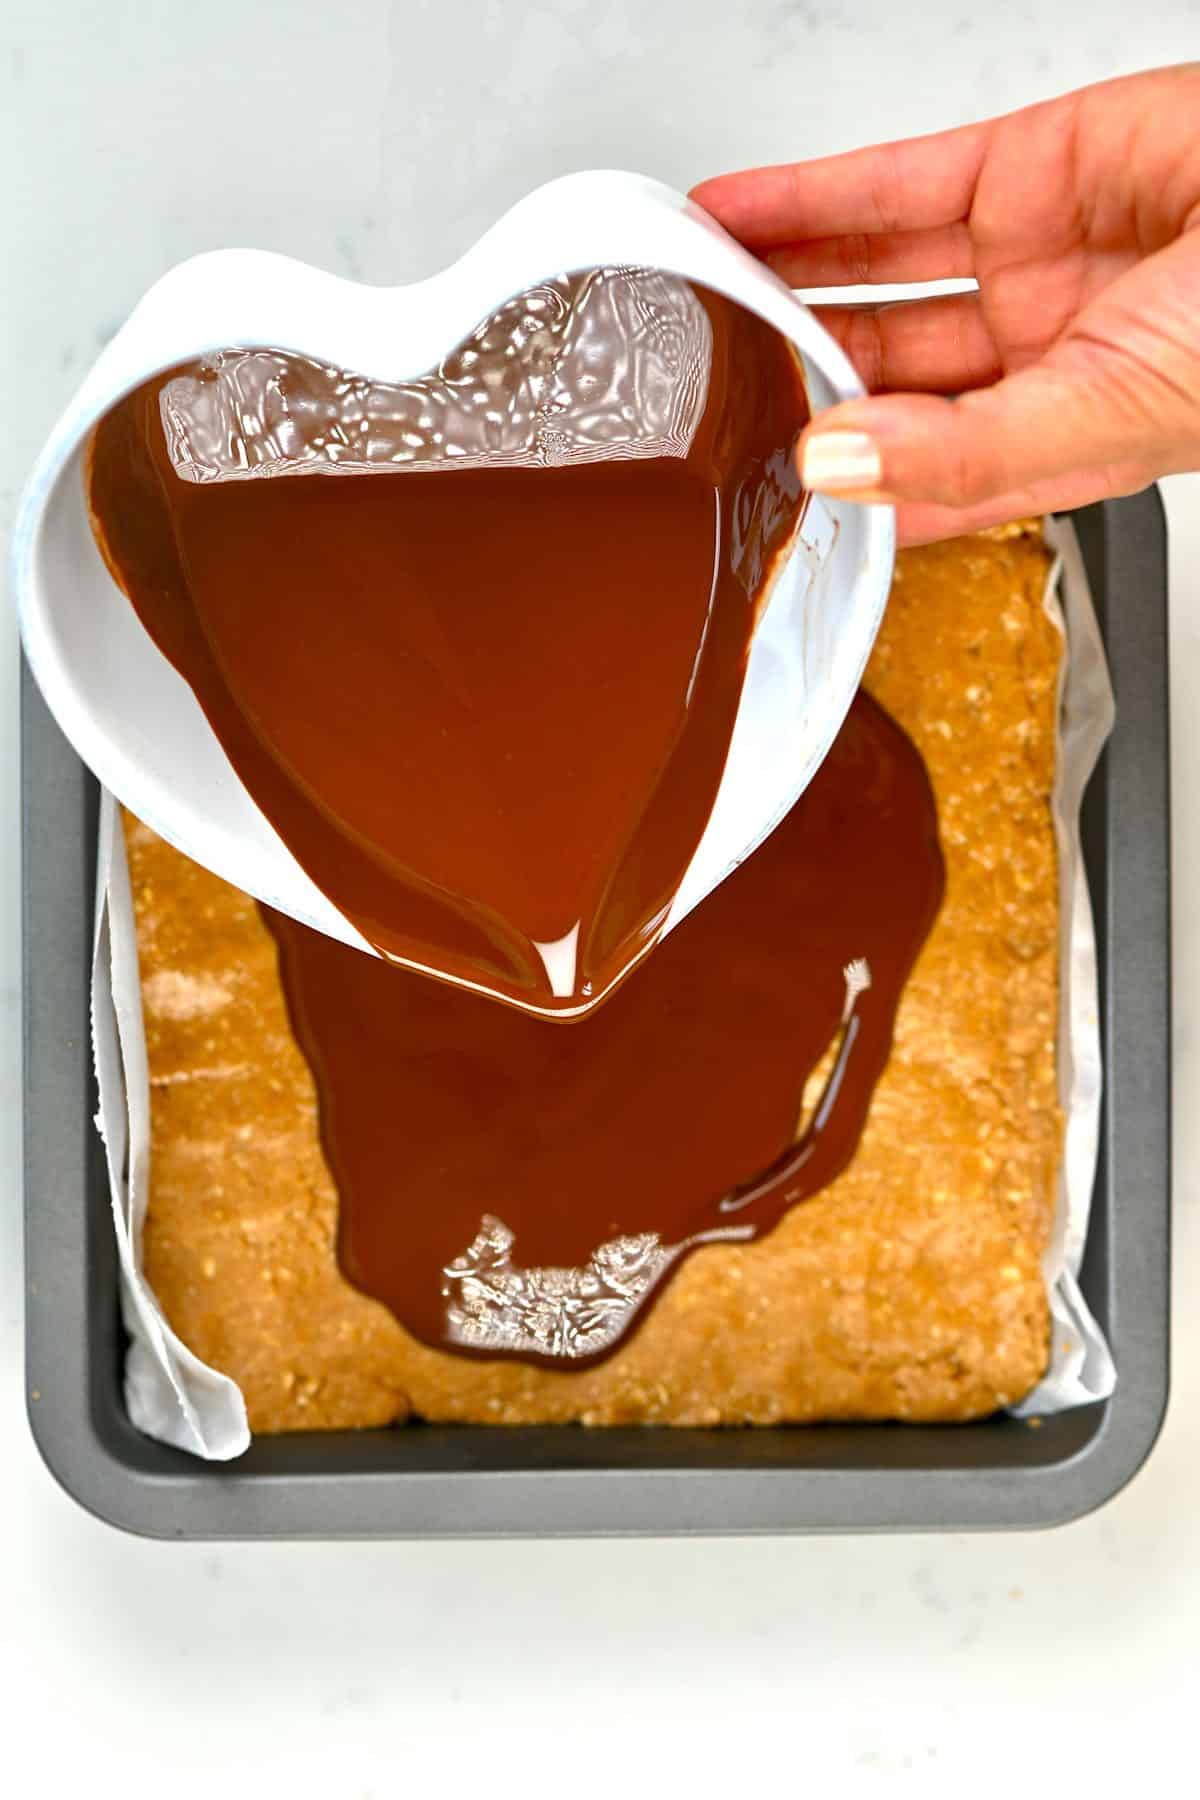 Pouring melted chocolate over peanut butter bars